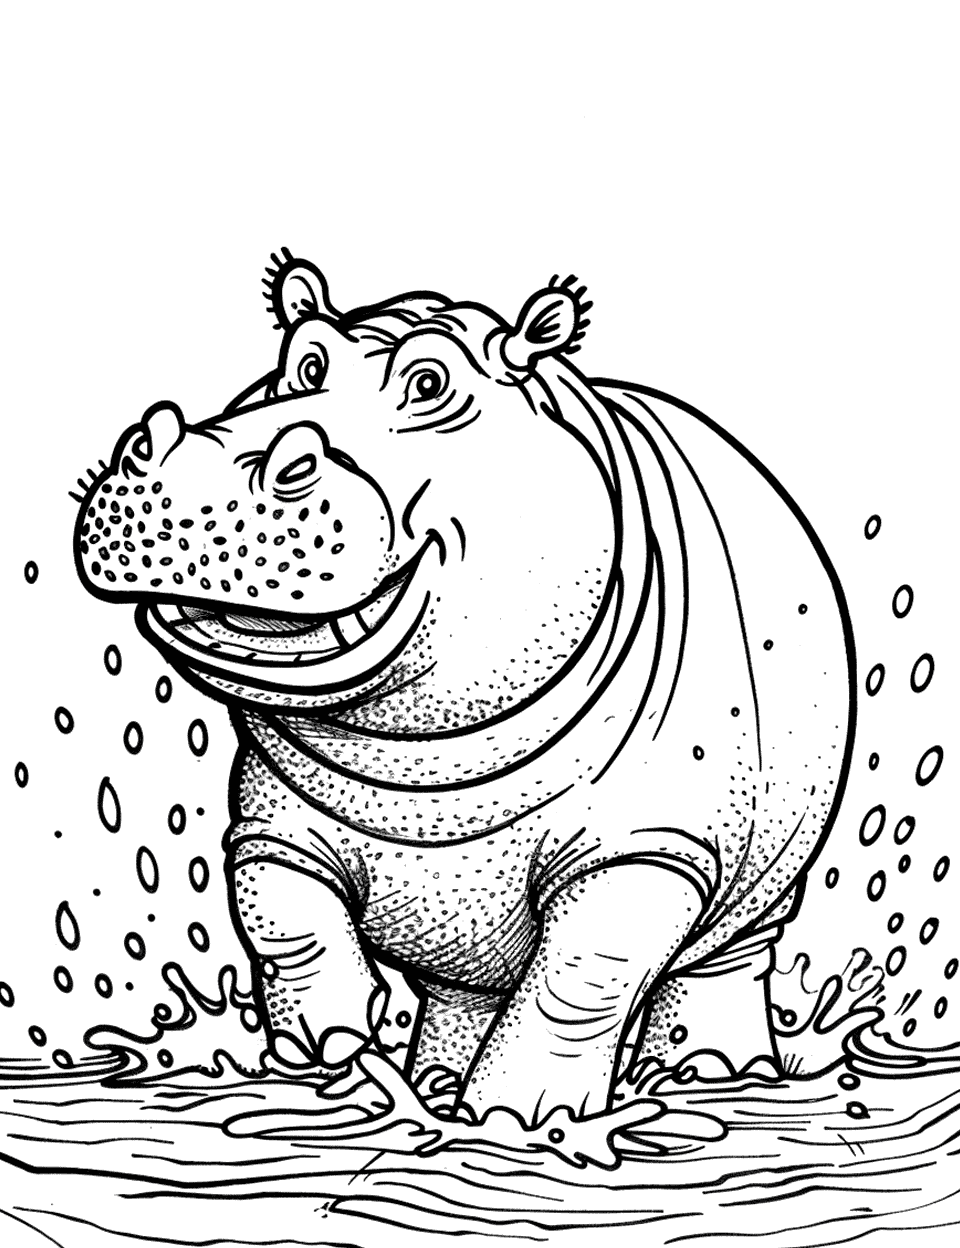 Hippo Rainy Day Coloring Page - A hippo happily jumping in puddles during a rainy day.